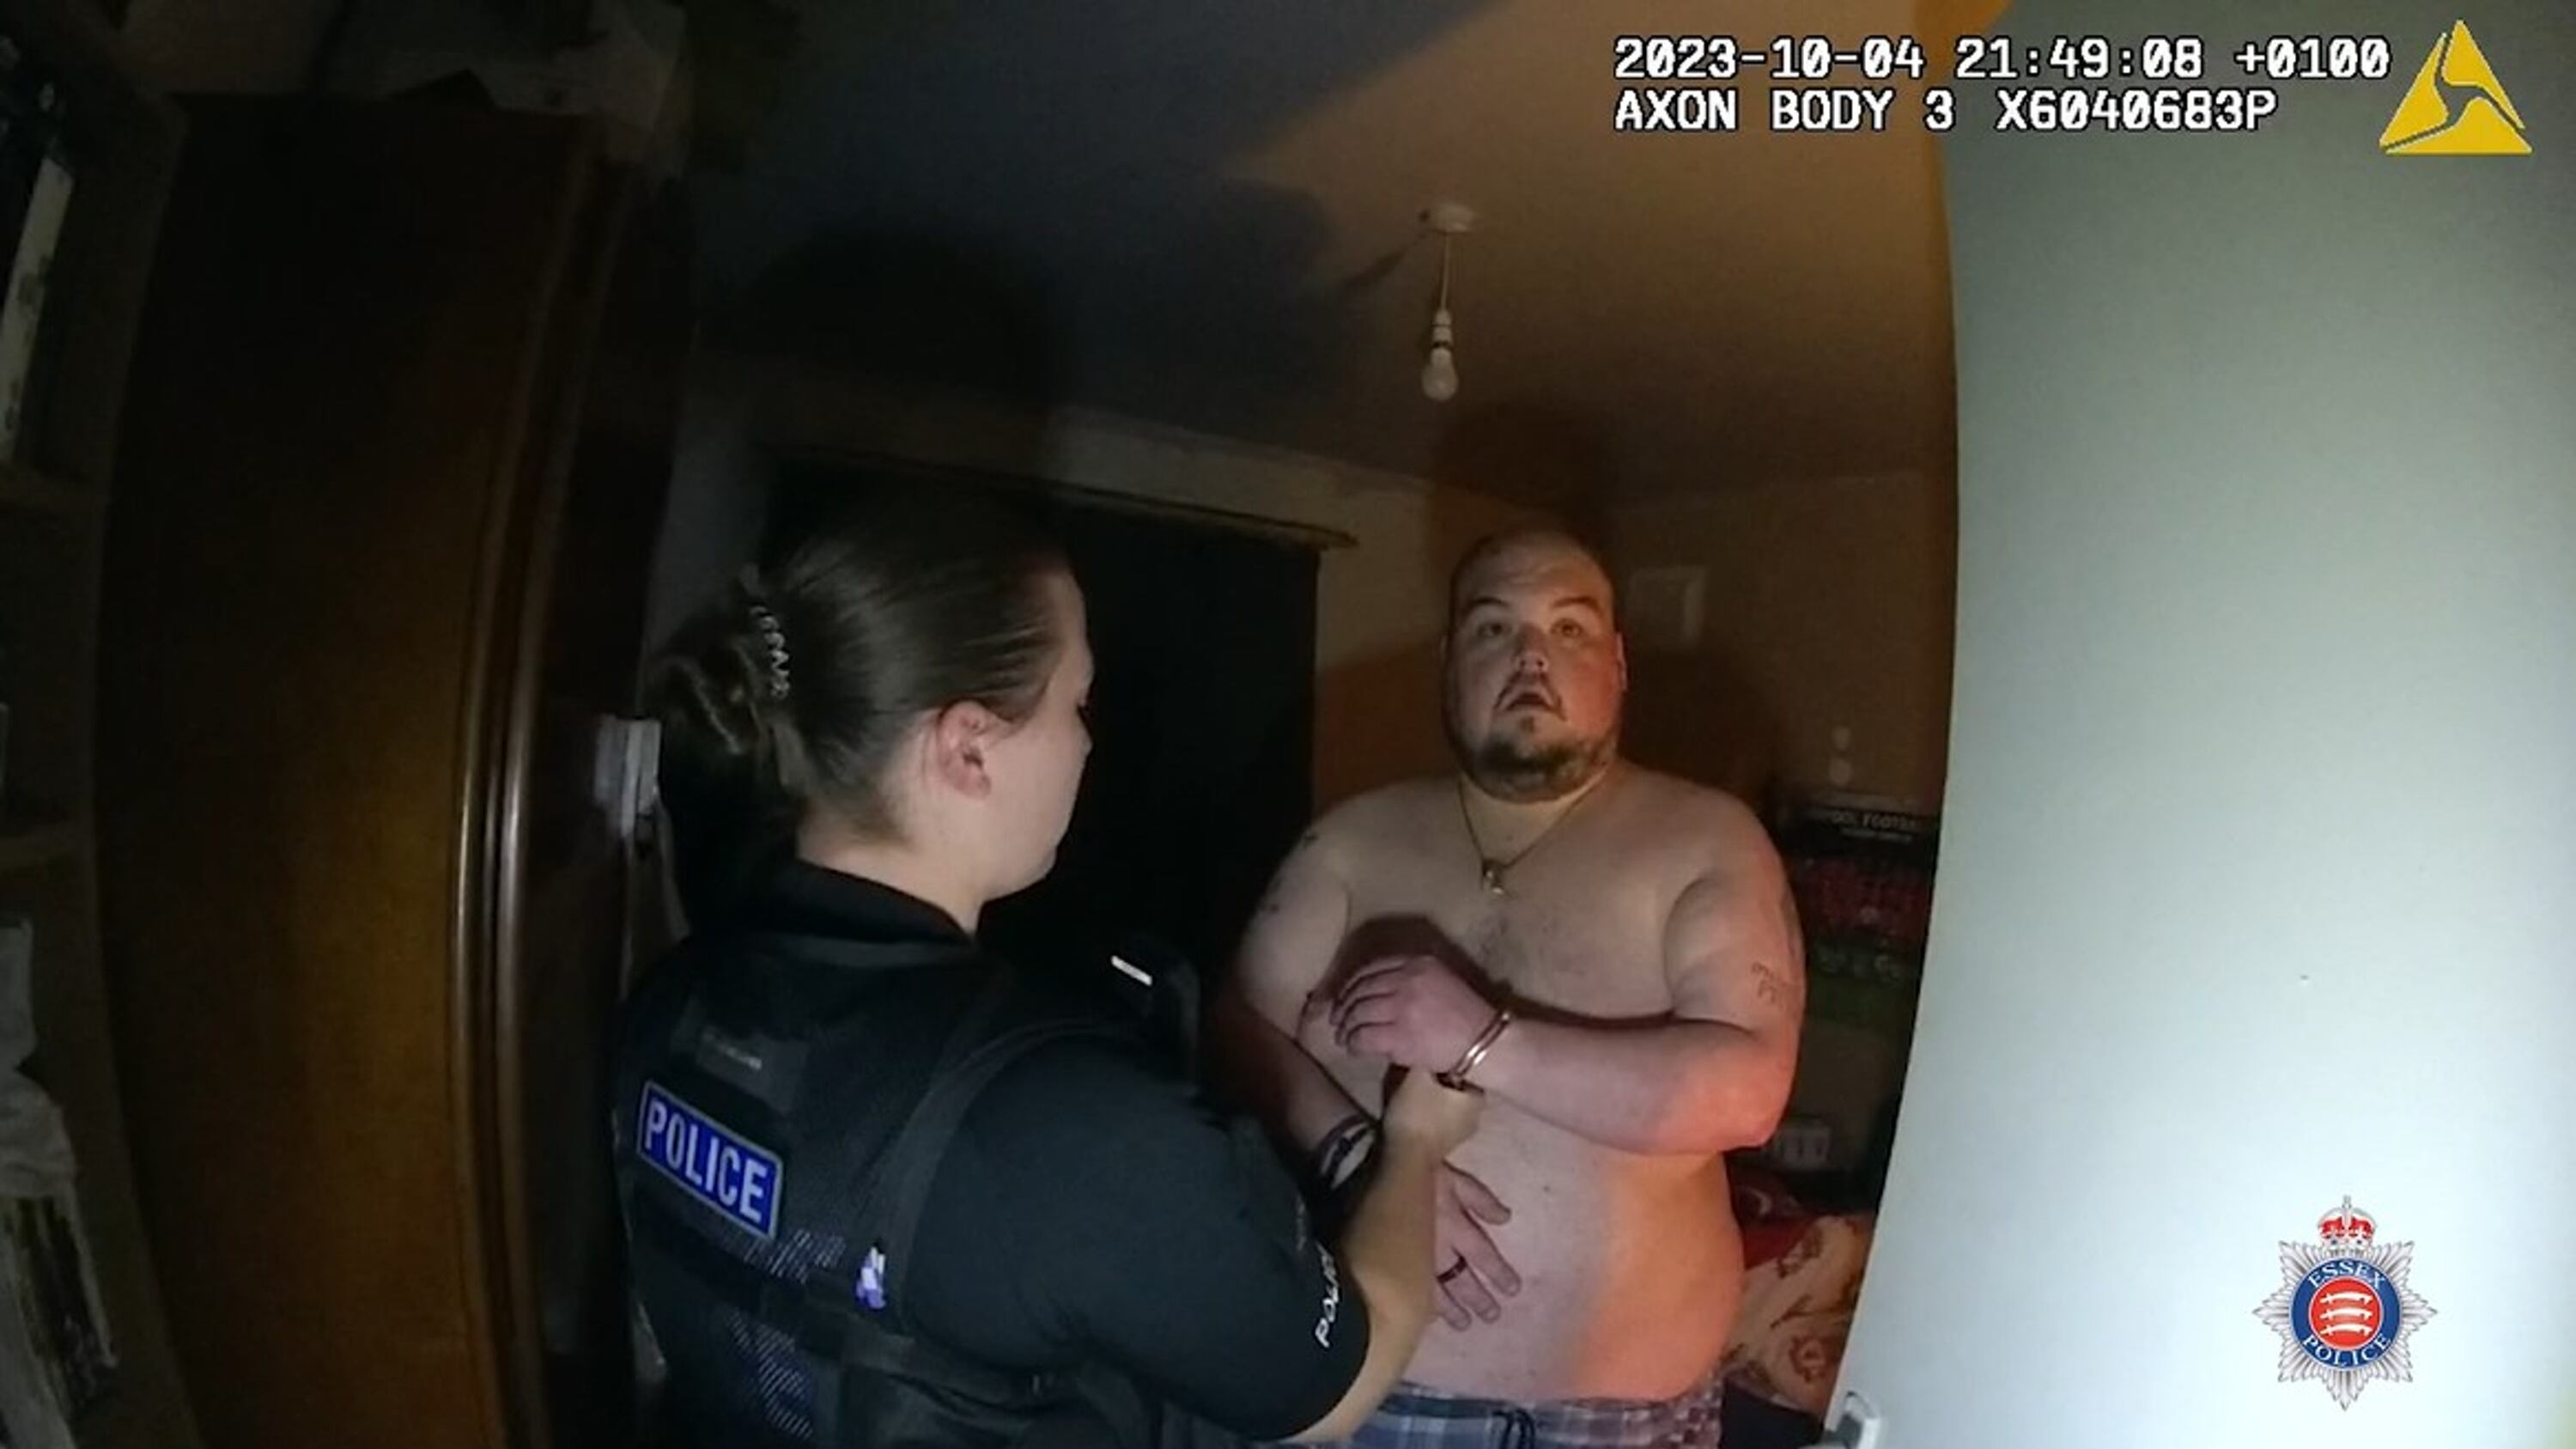 Screengrab from police body-worn video footage of the arrest of Gavin Plumb, who is accused of a plot to kidnap, rape and murder the TV presenter Holly Willoughby